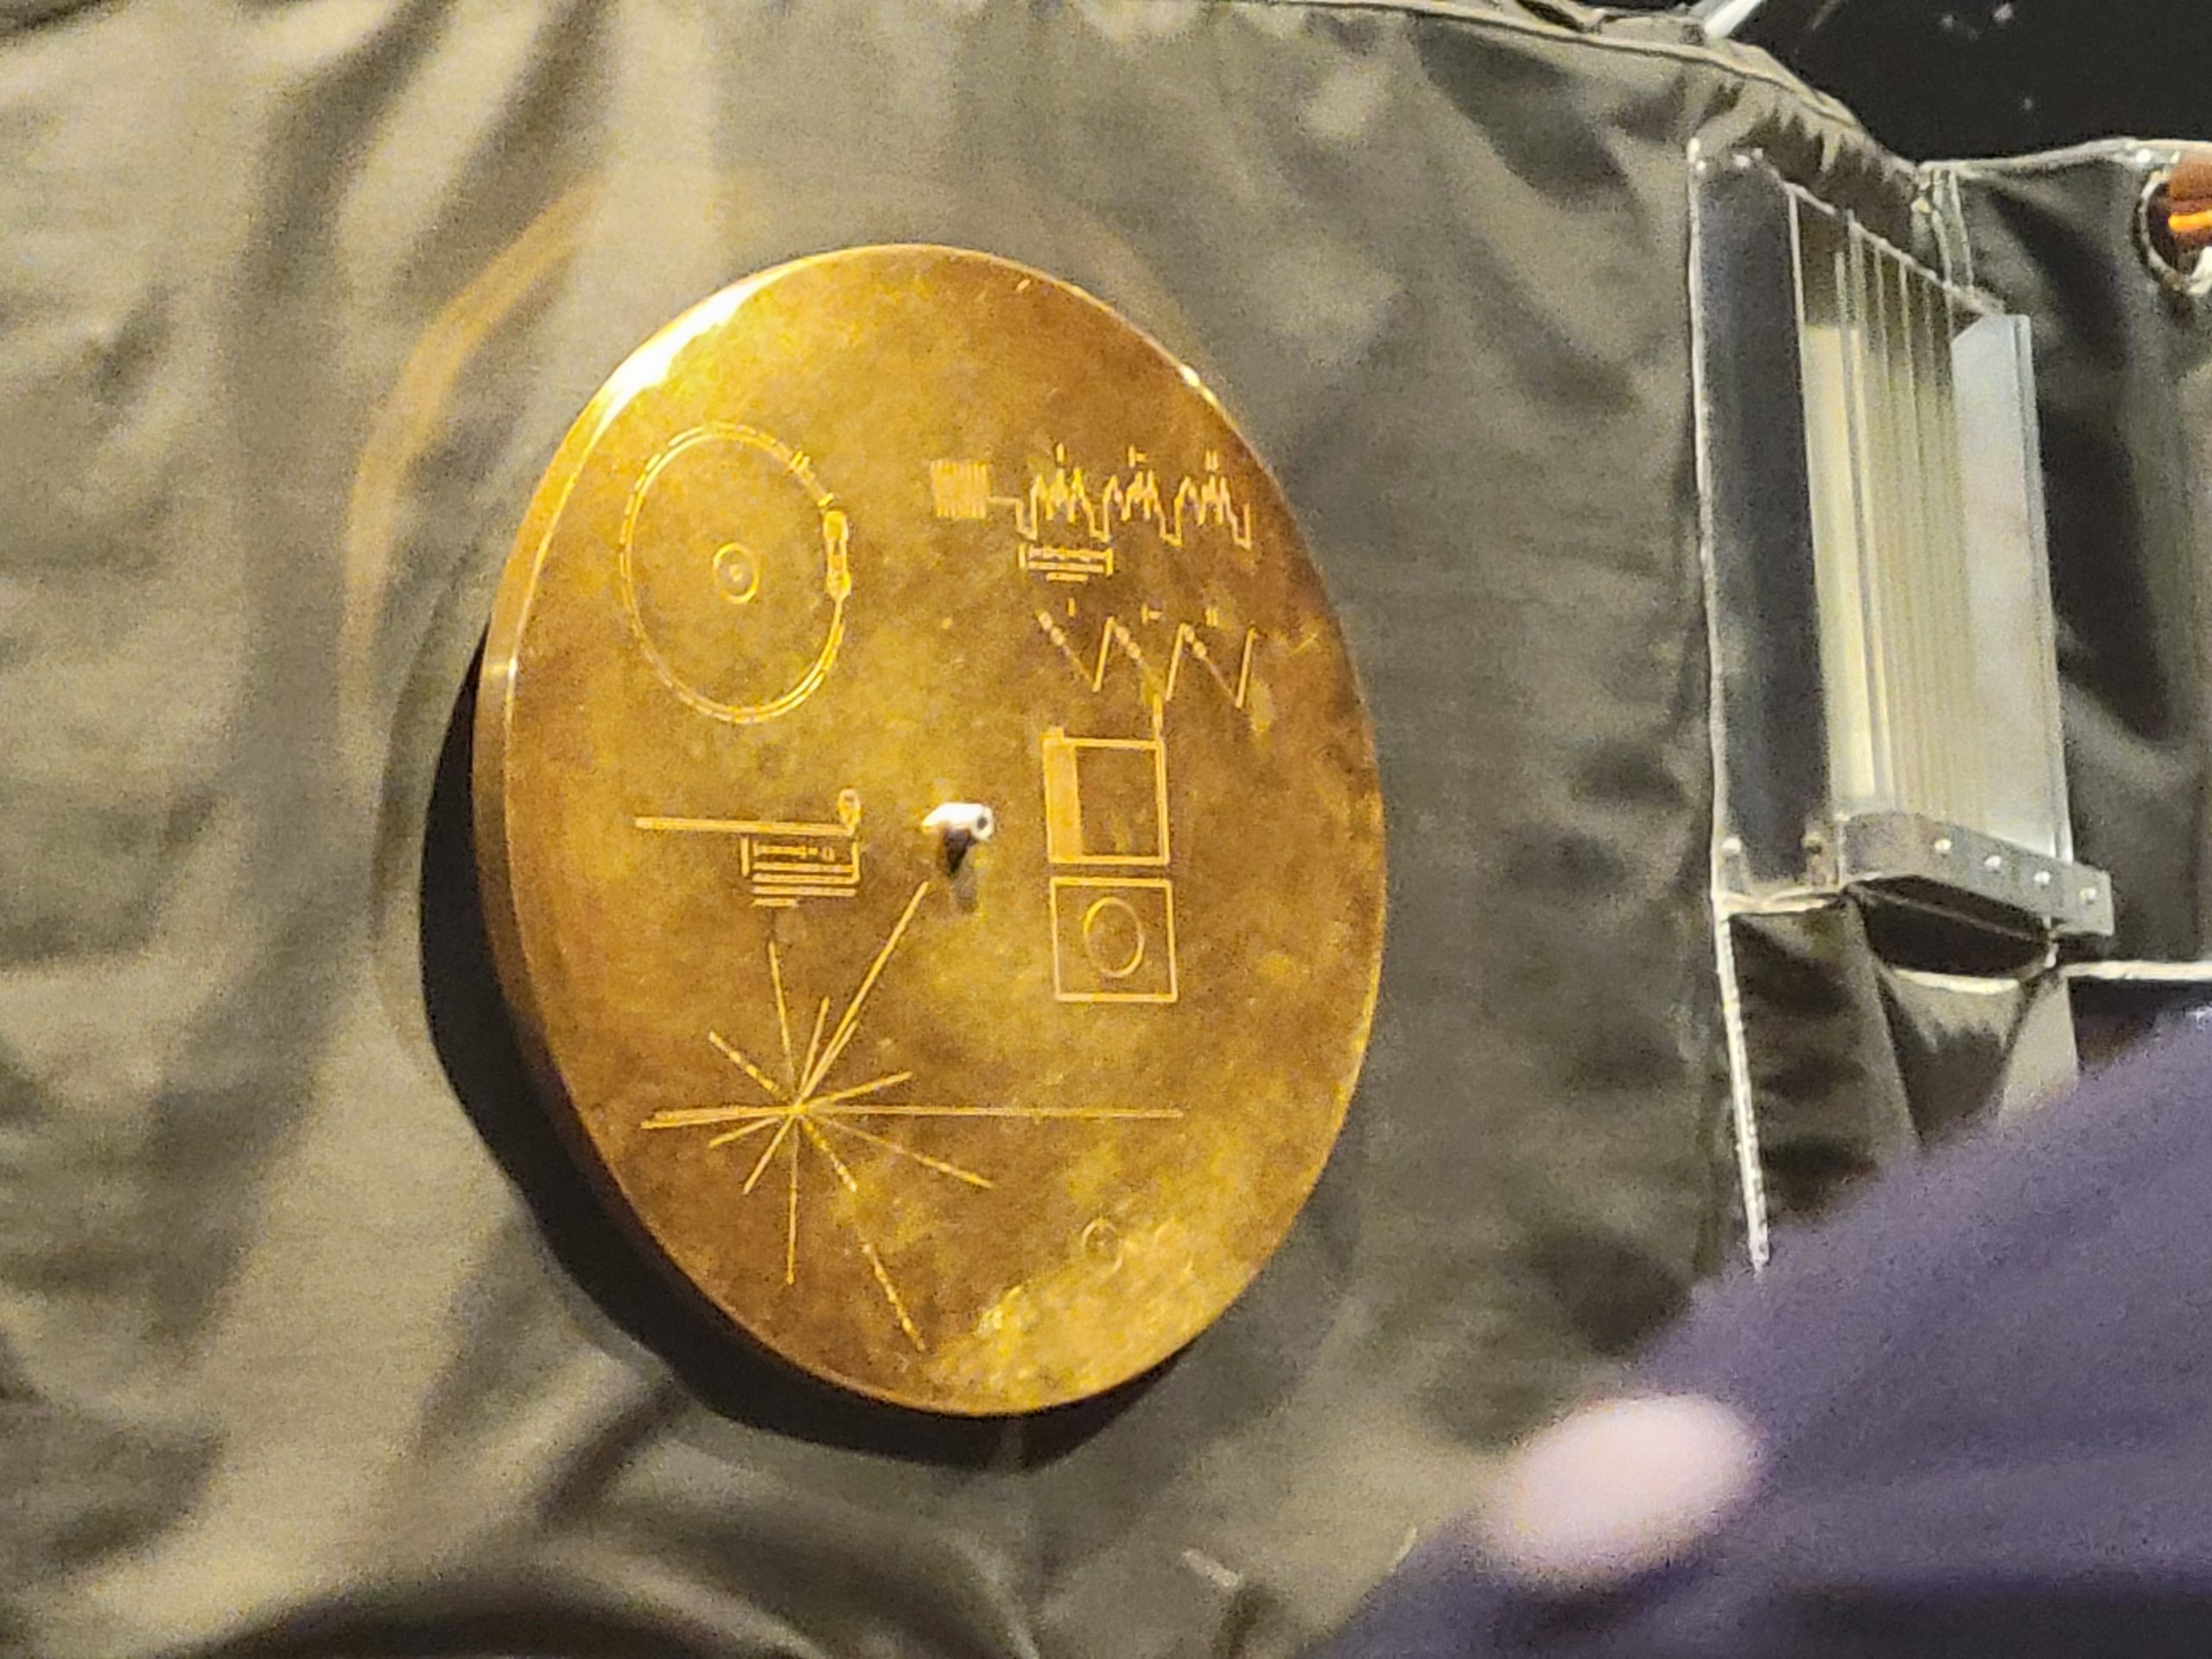 The Golden Record aboard the Voyager spacecrafts